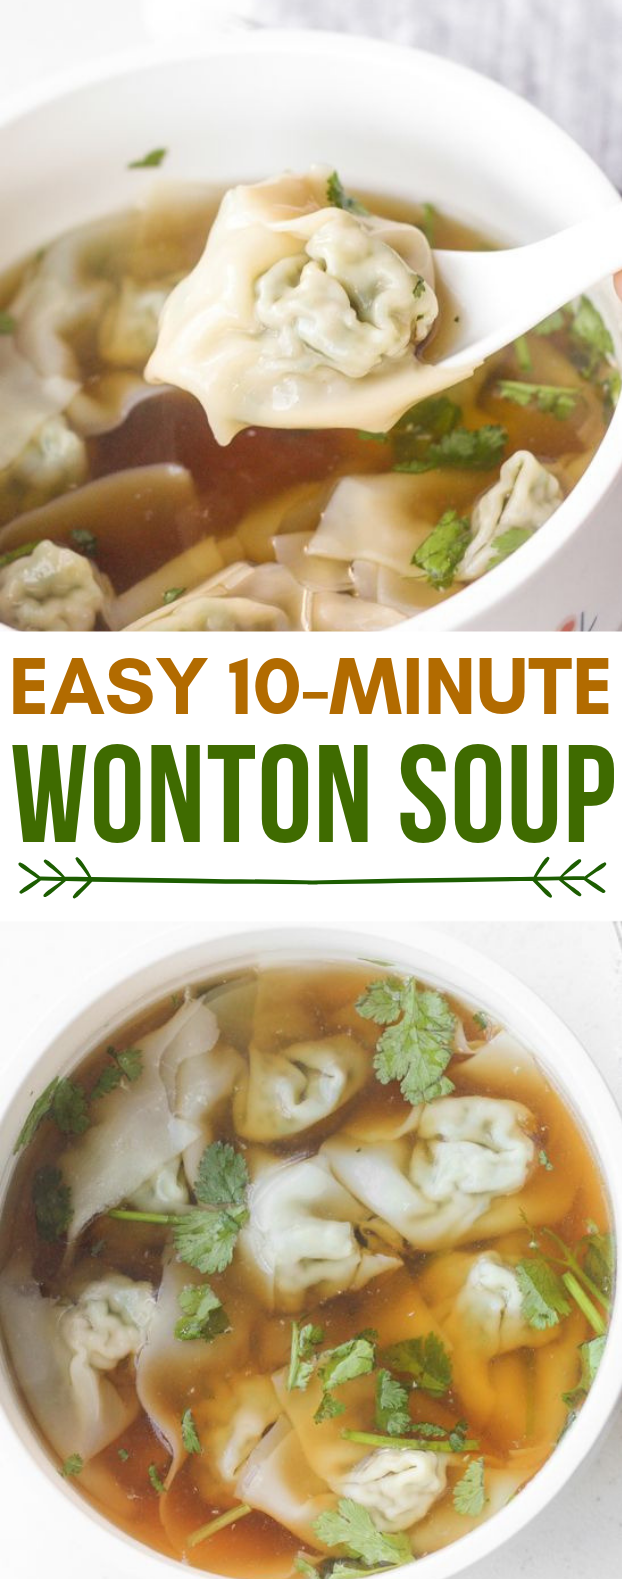 EASY 10-MINUTE WONTON SOUP #meals #lunch